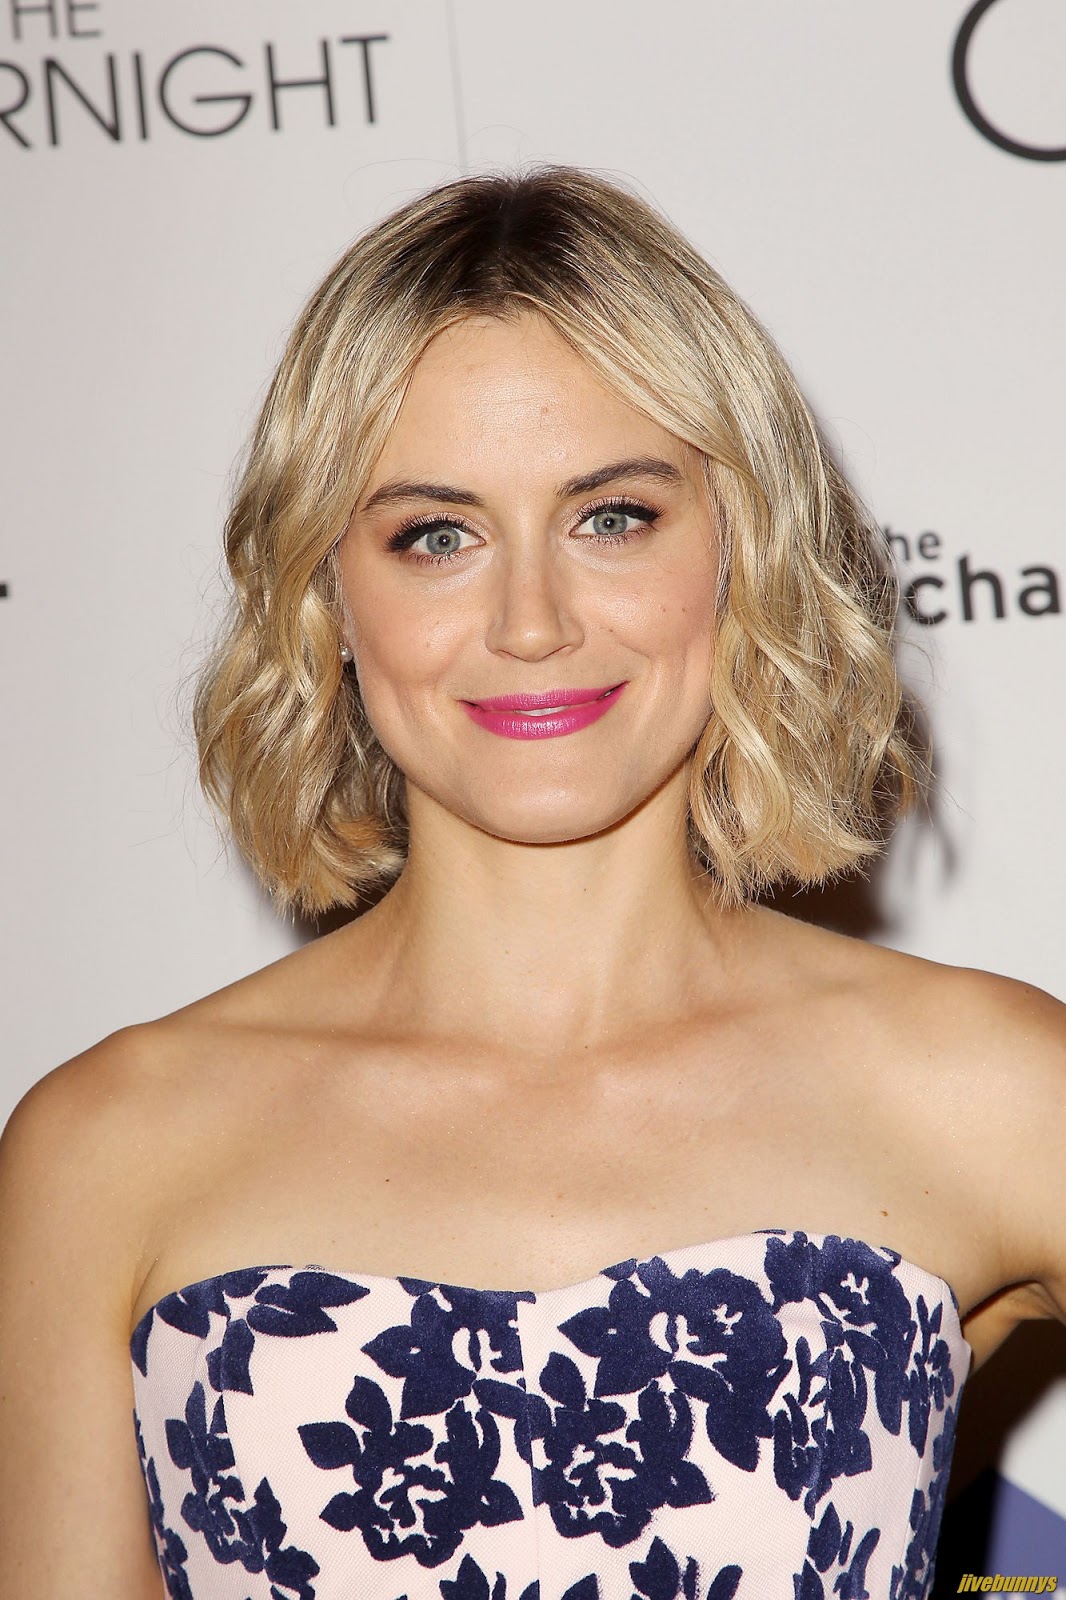 Taylor Schilling Sexy Photo Gallery 3 - Celebrity About